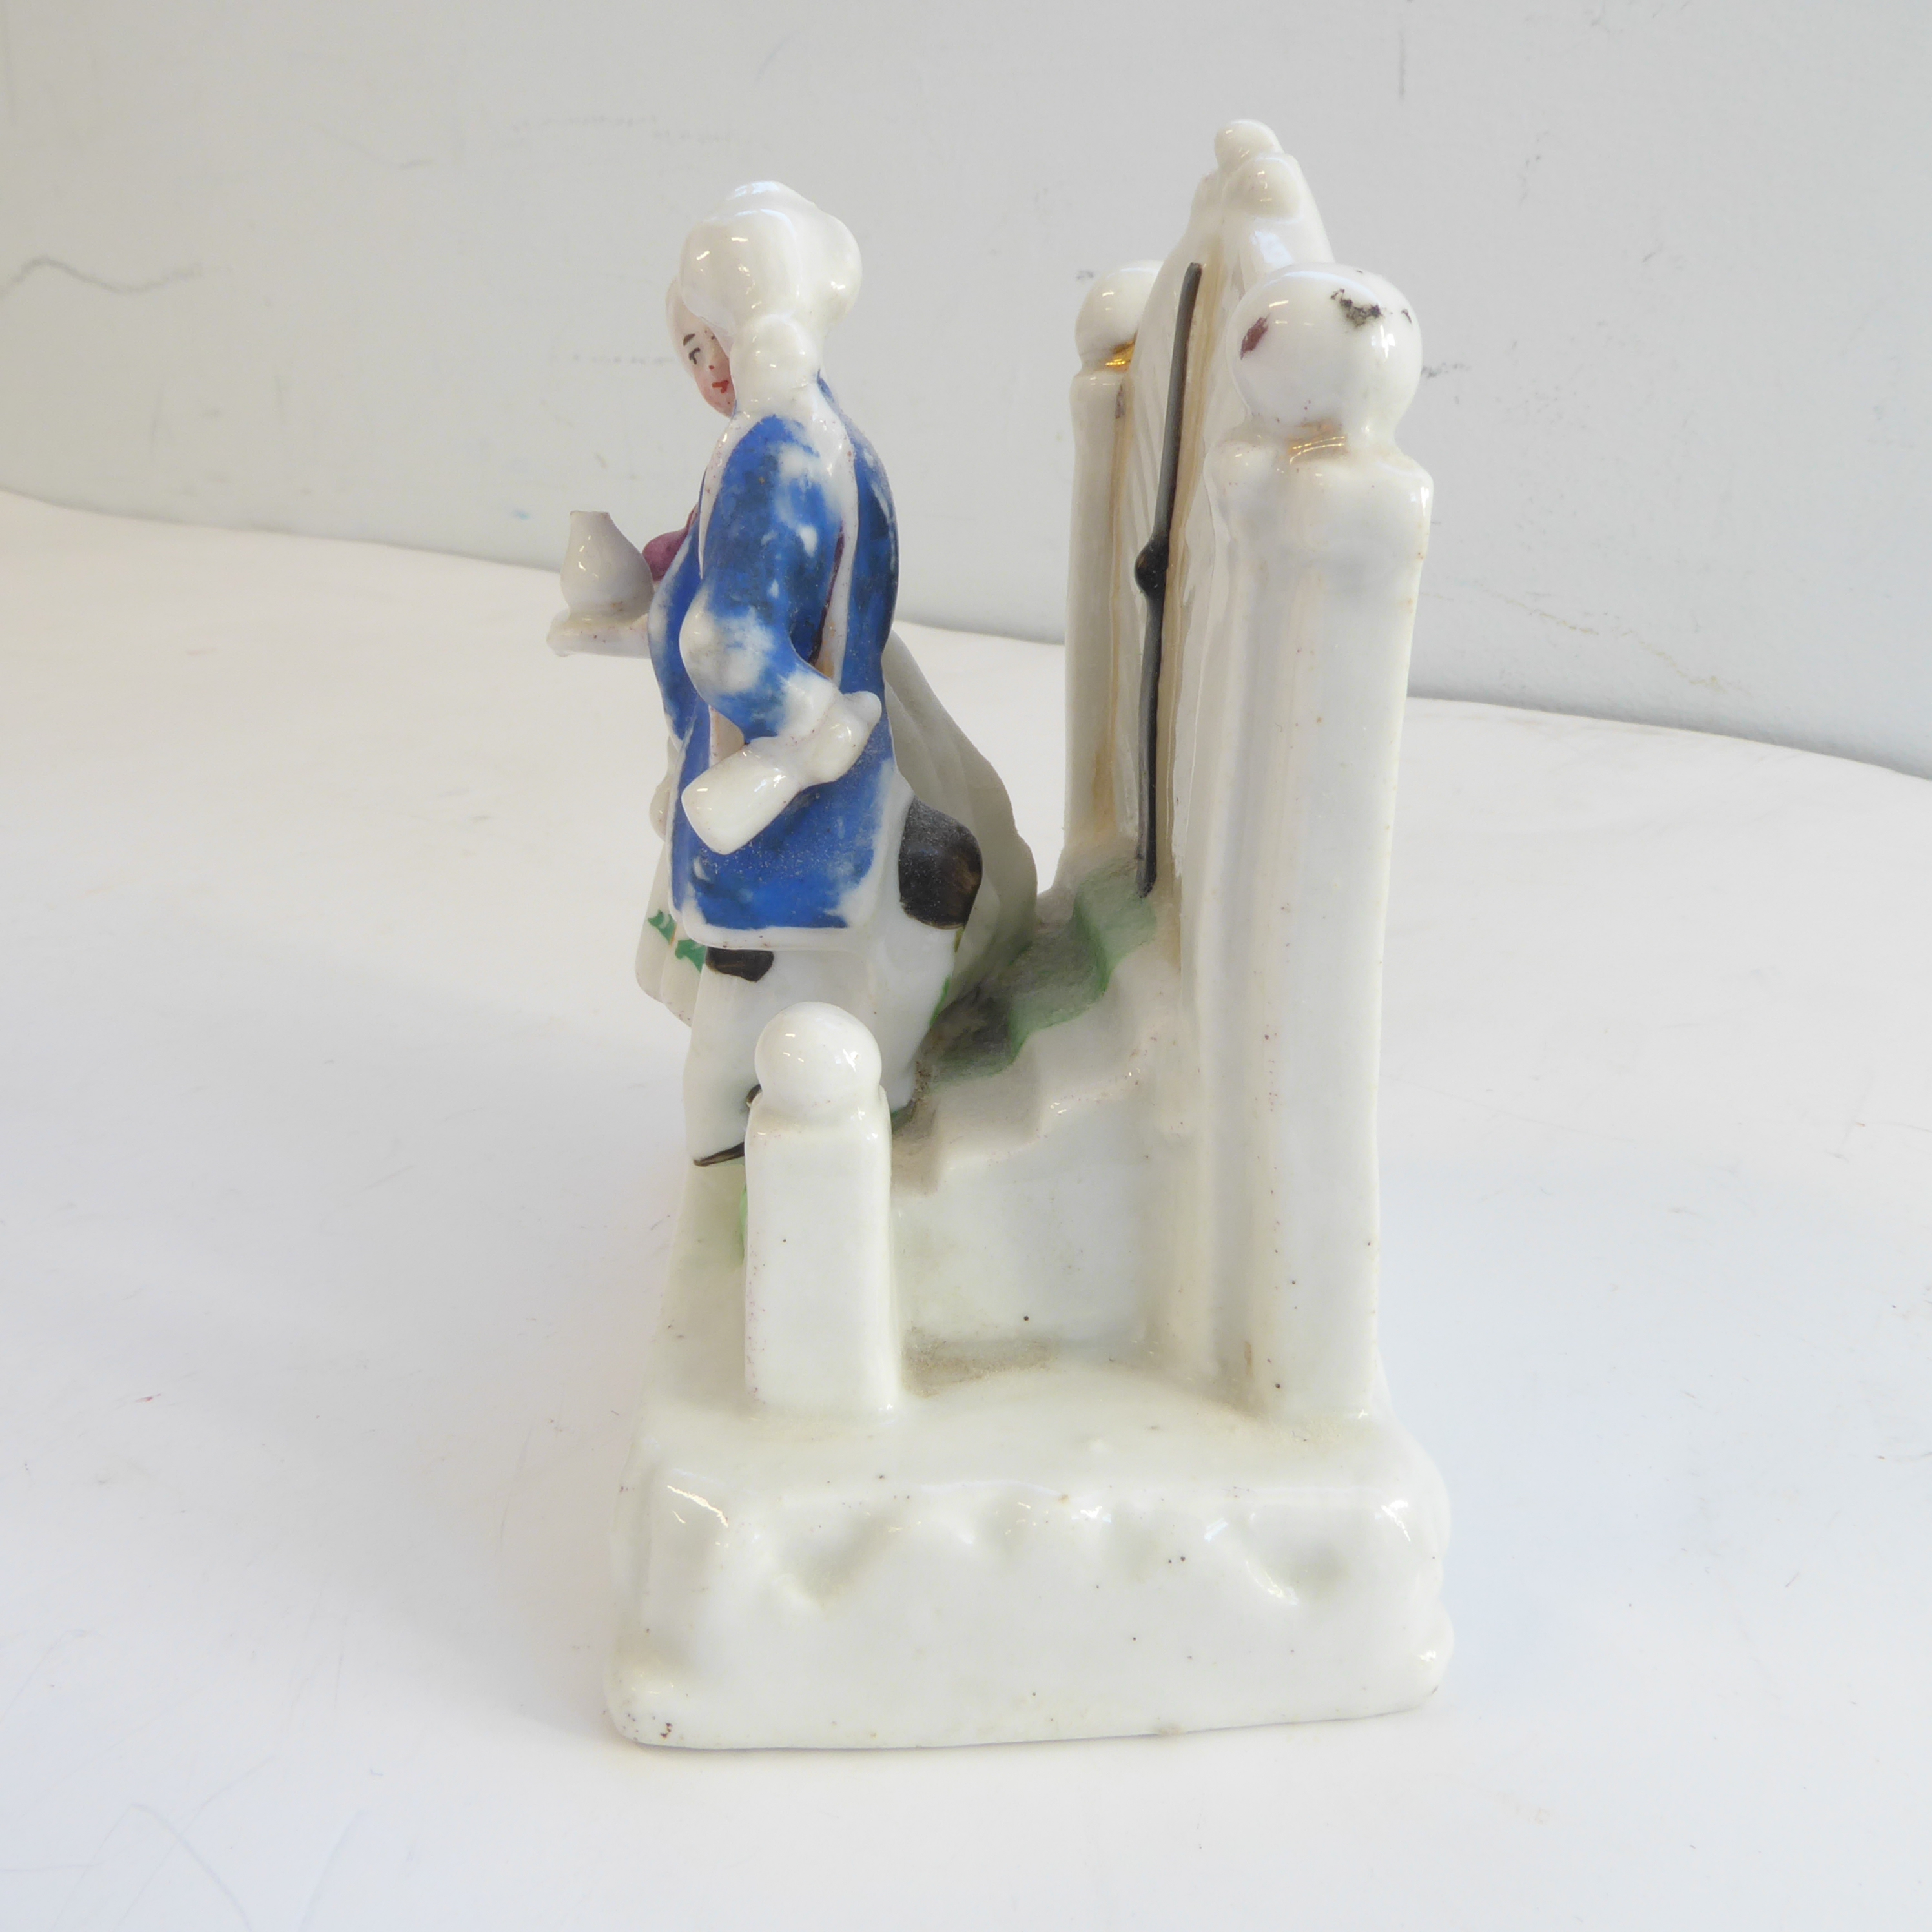 Twelve 19th century fairings to include 'The attentive maid', 'The broken hoop', 'The wedding - Image 36 of 49